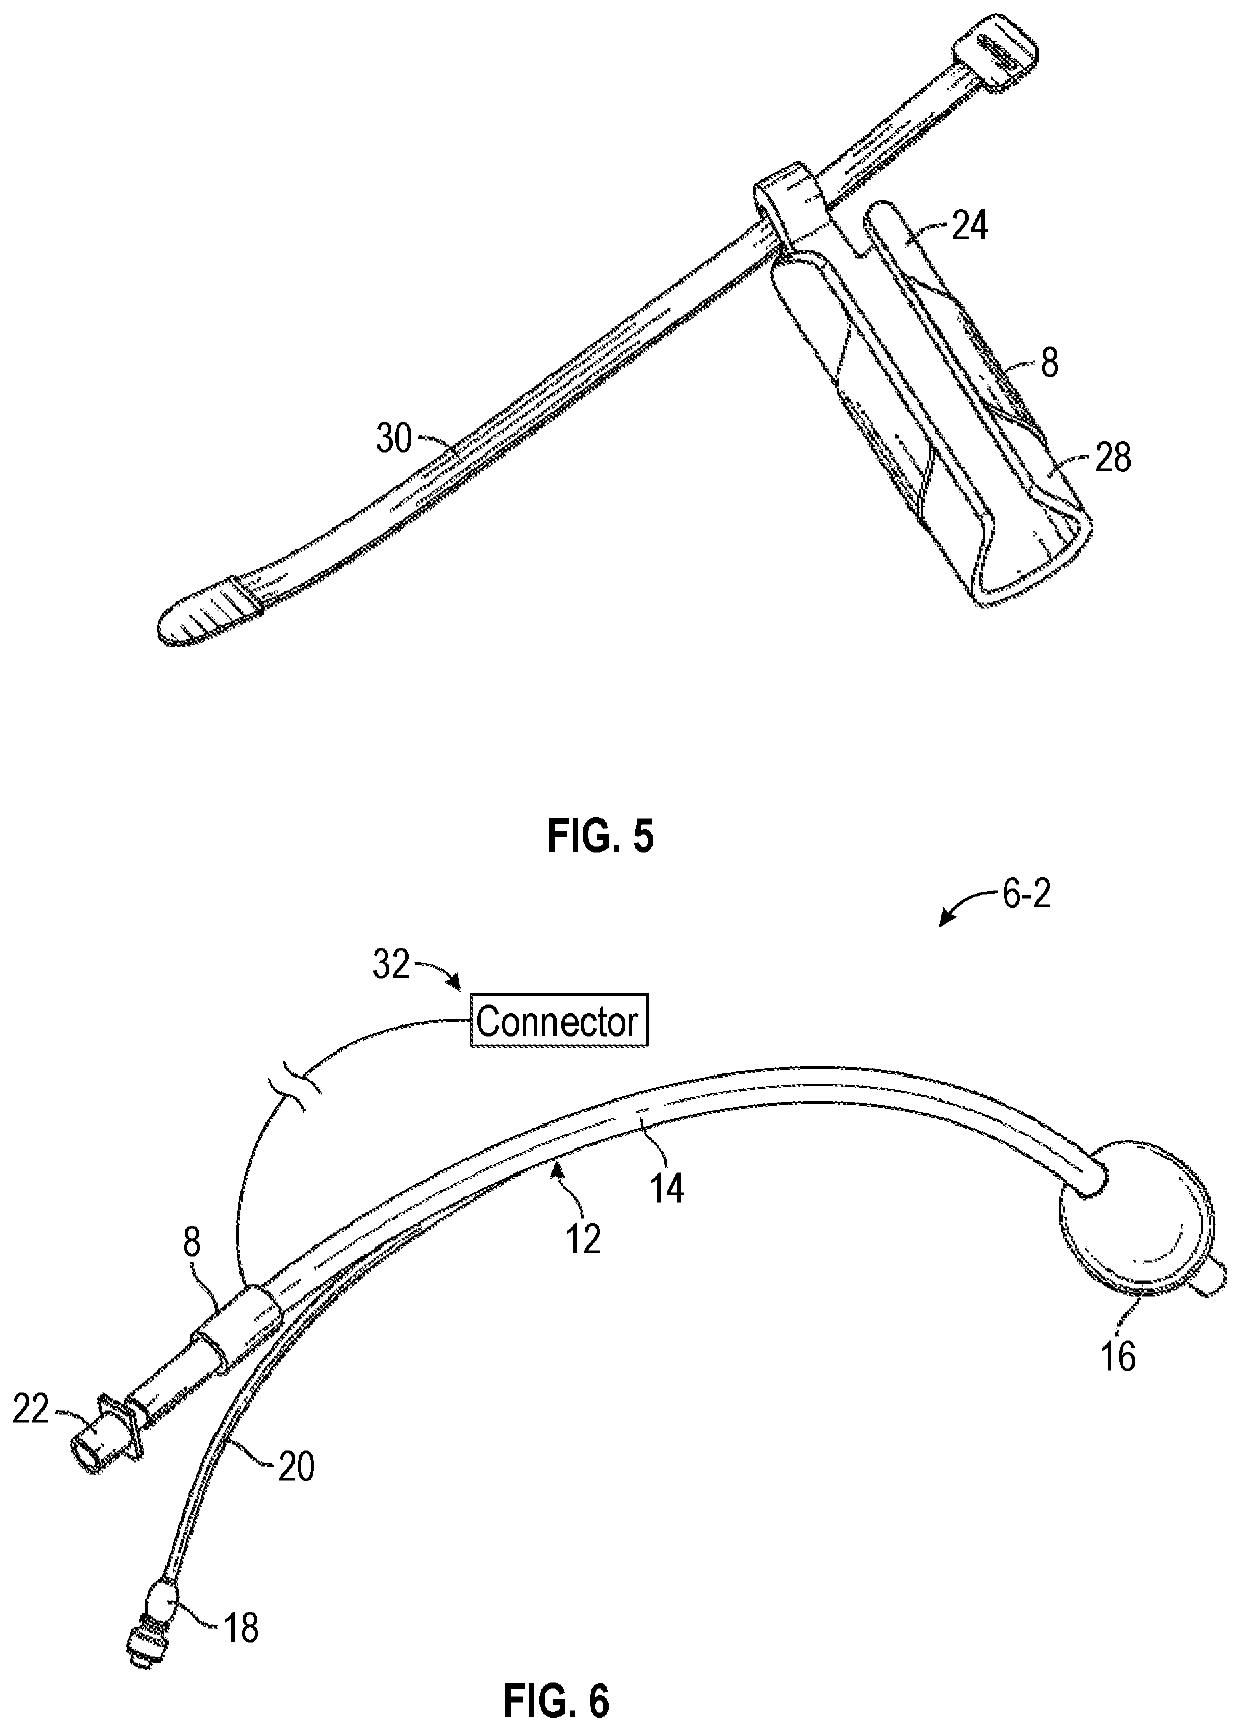 System and method for detecting agitation, discomfort and/or self-extubation during intubation